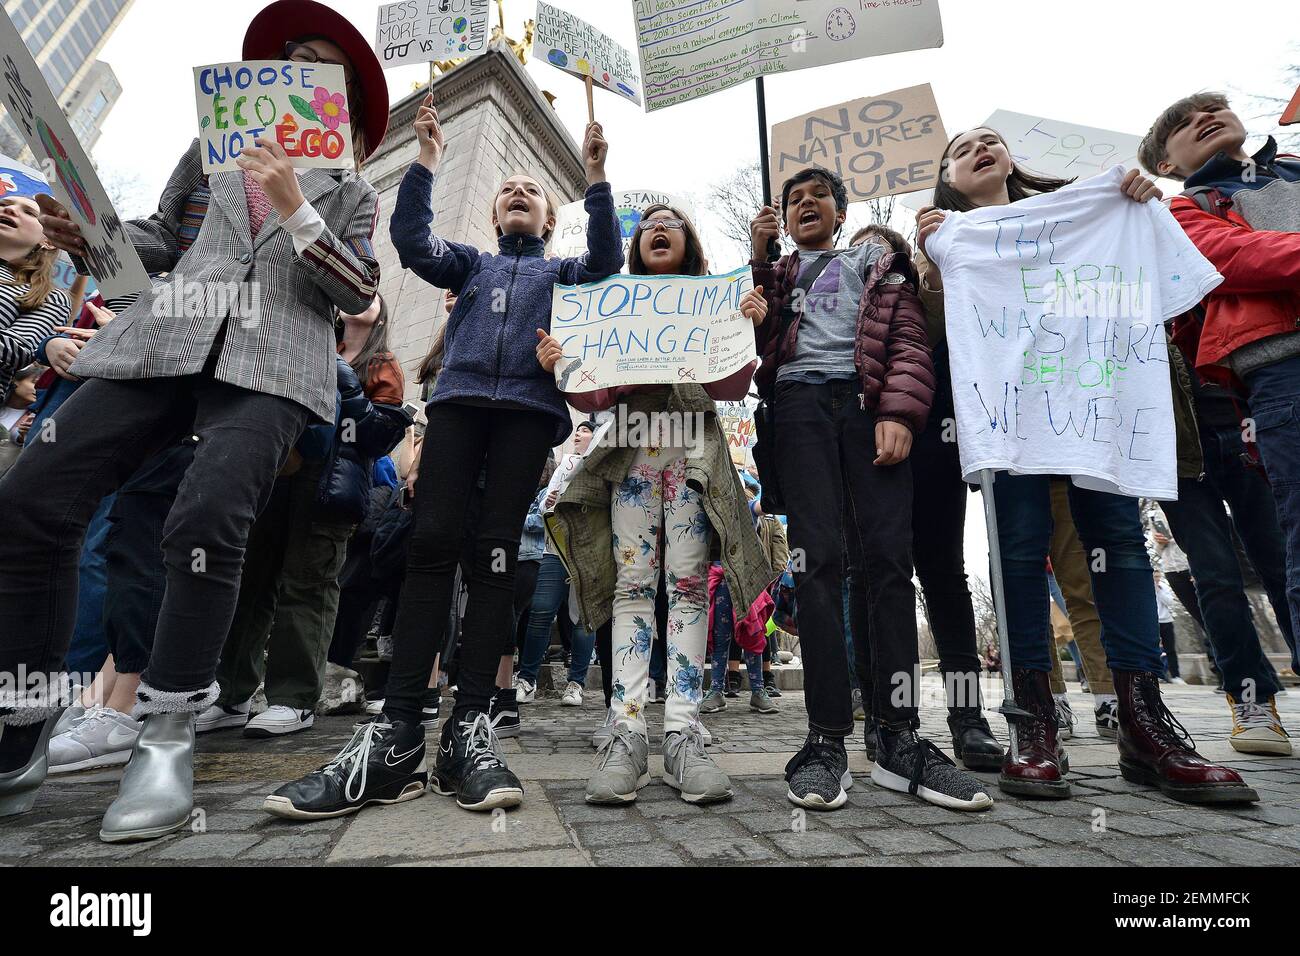 Students participate in the U.S. Youth Climate Strike at Columbus Circle in New York, NY, March 15, 2019. Thousands of students around the world skipped school Friday to protest lack of action on climate change. (Photo by Anthony Behar/Sipa USA) Stock Photo